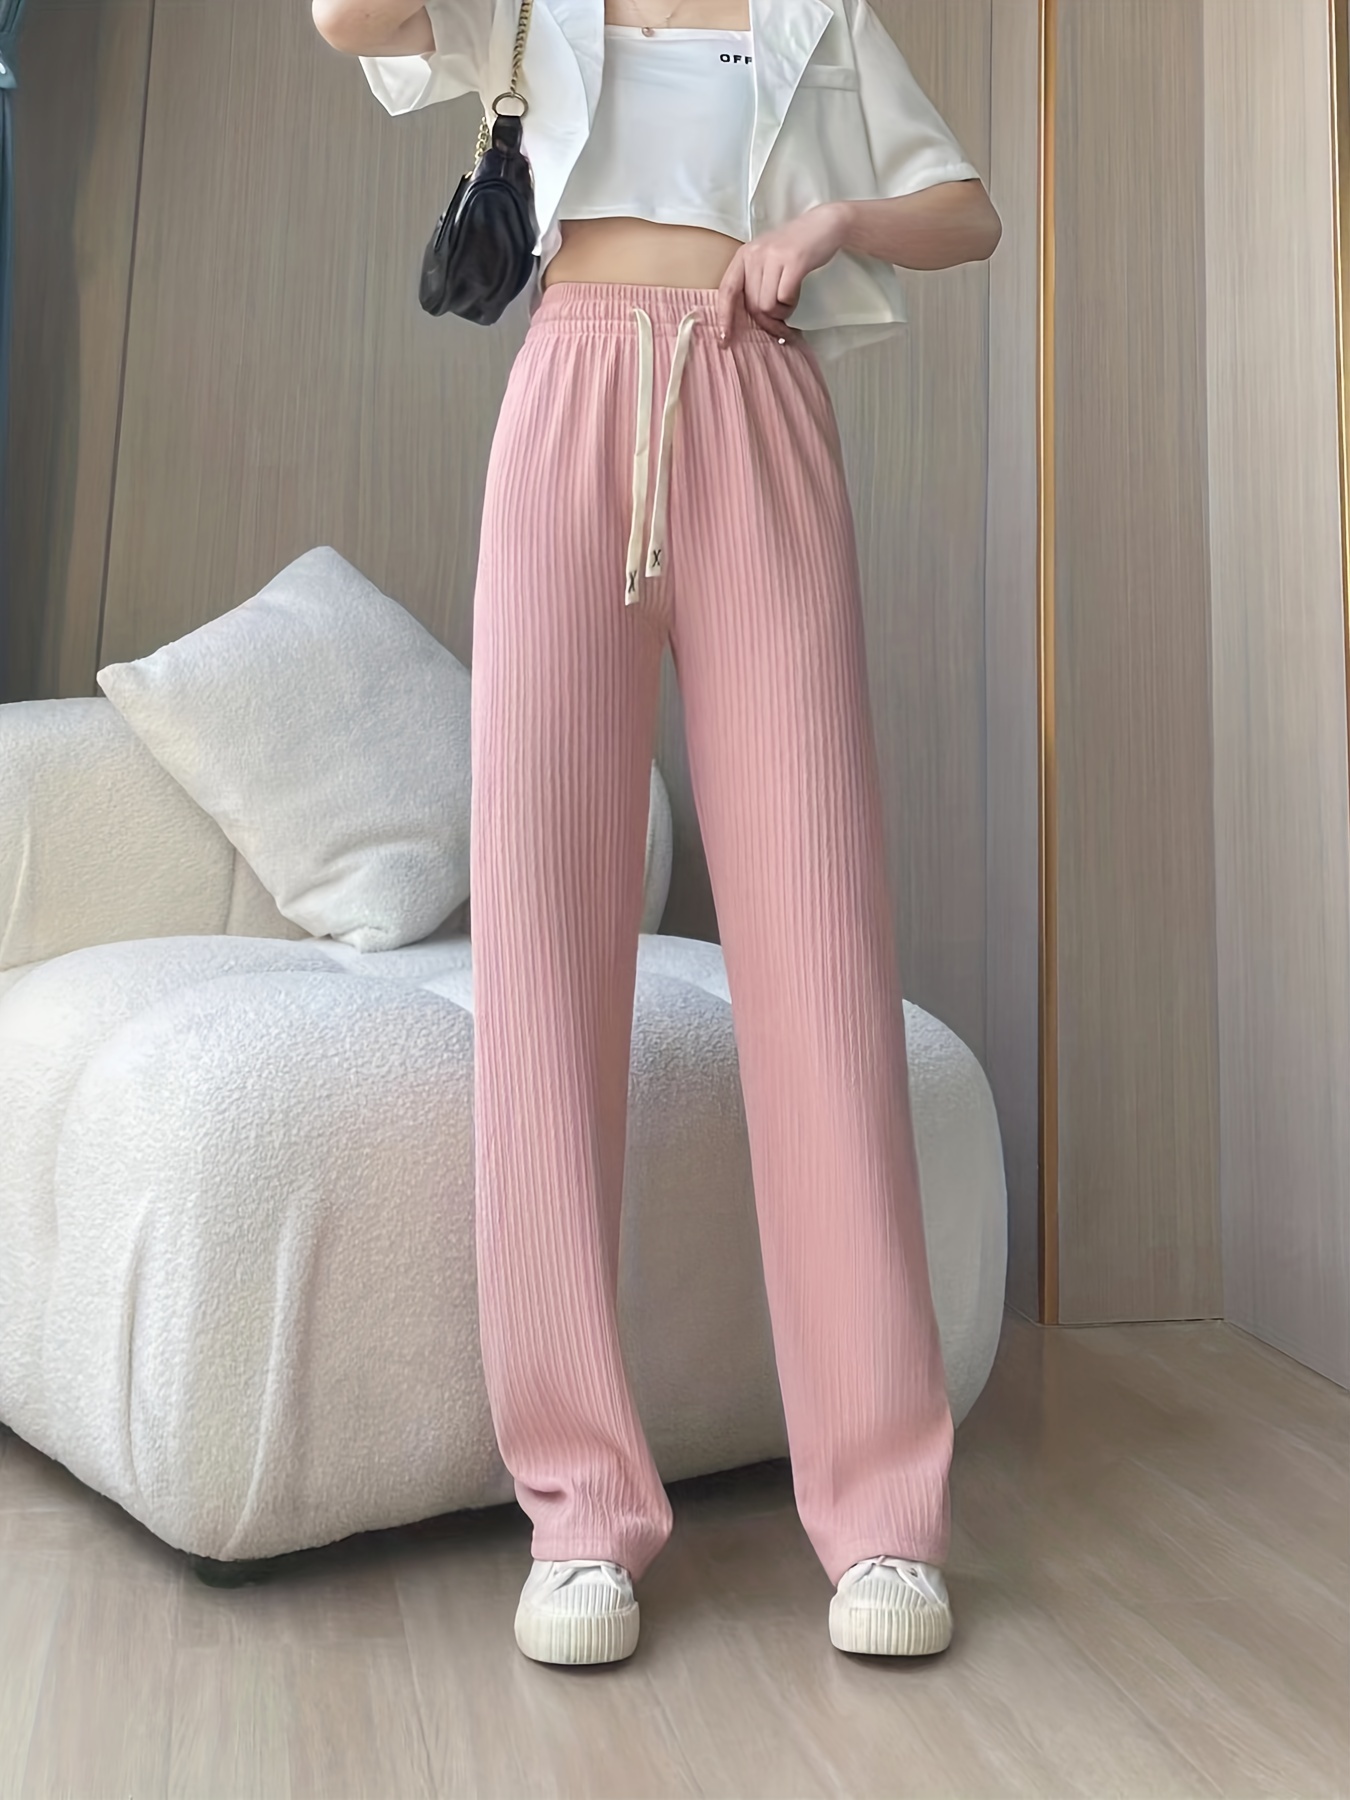 Women's High Waist Skinny Comfy Stretchy Work Pants Casual Long Pants  Straight Leg Pants Solid Color Soft Suit Pants